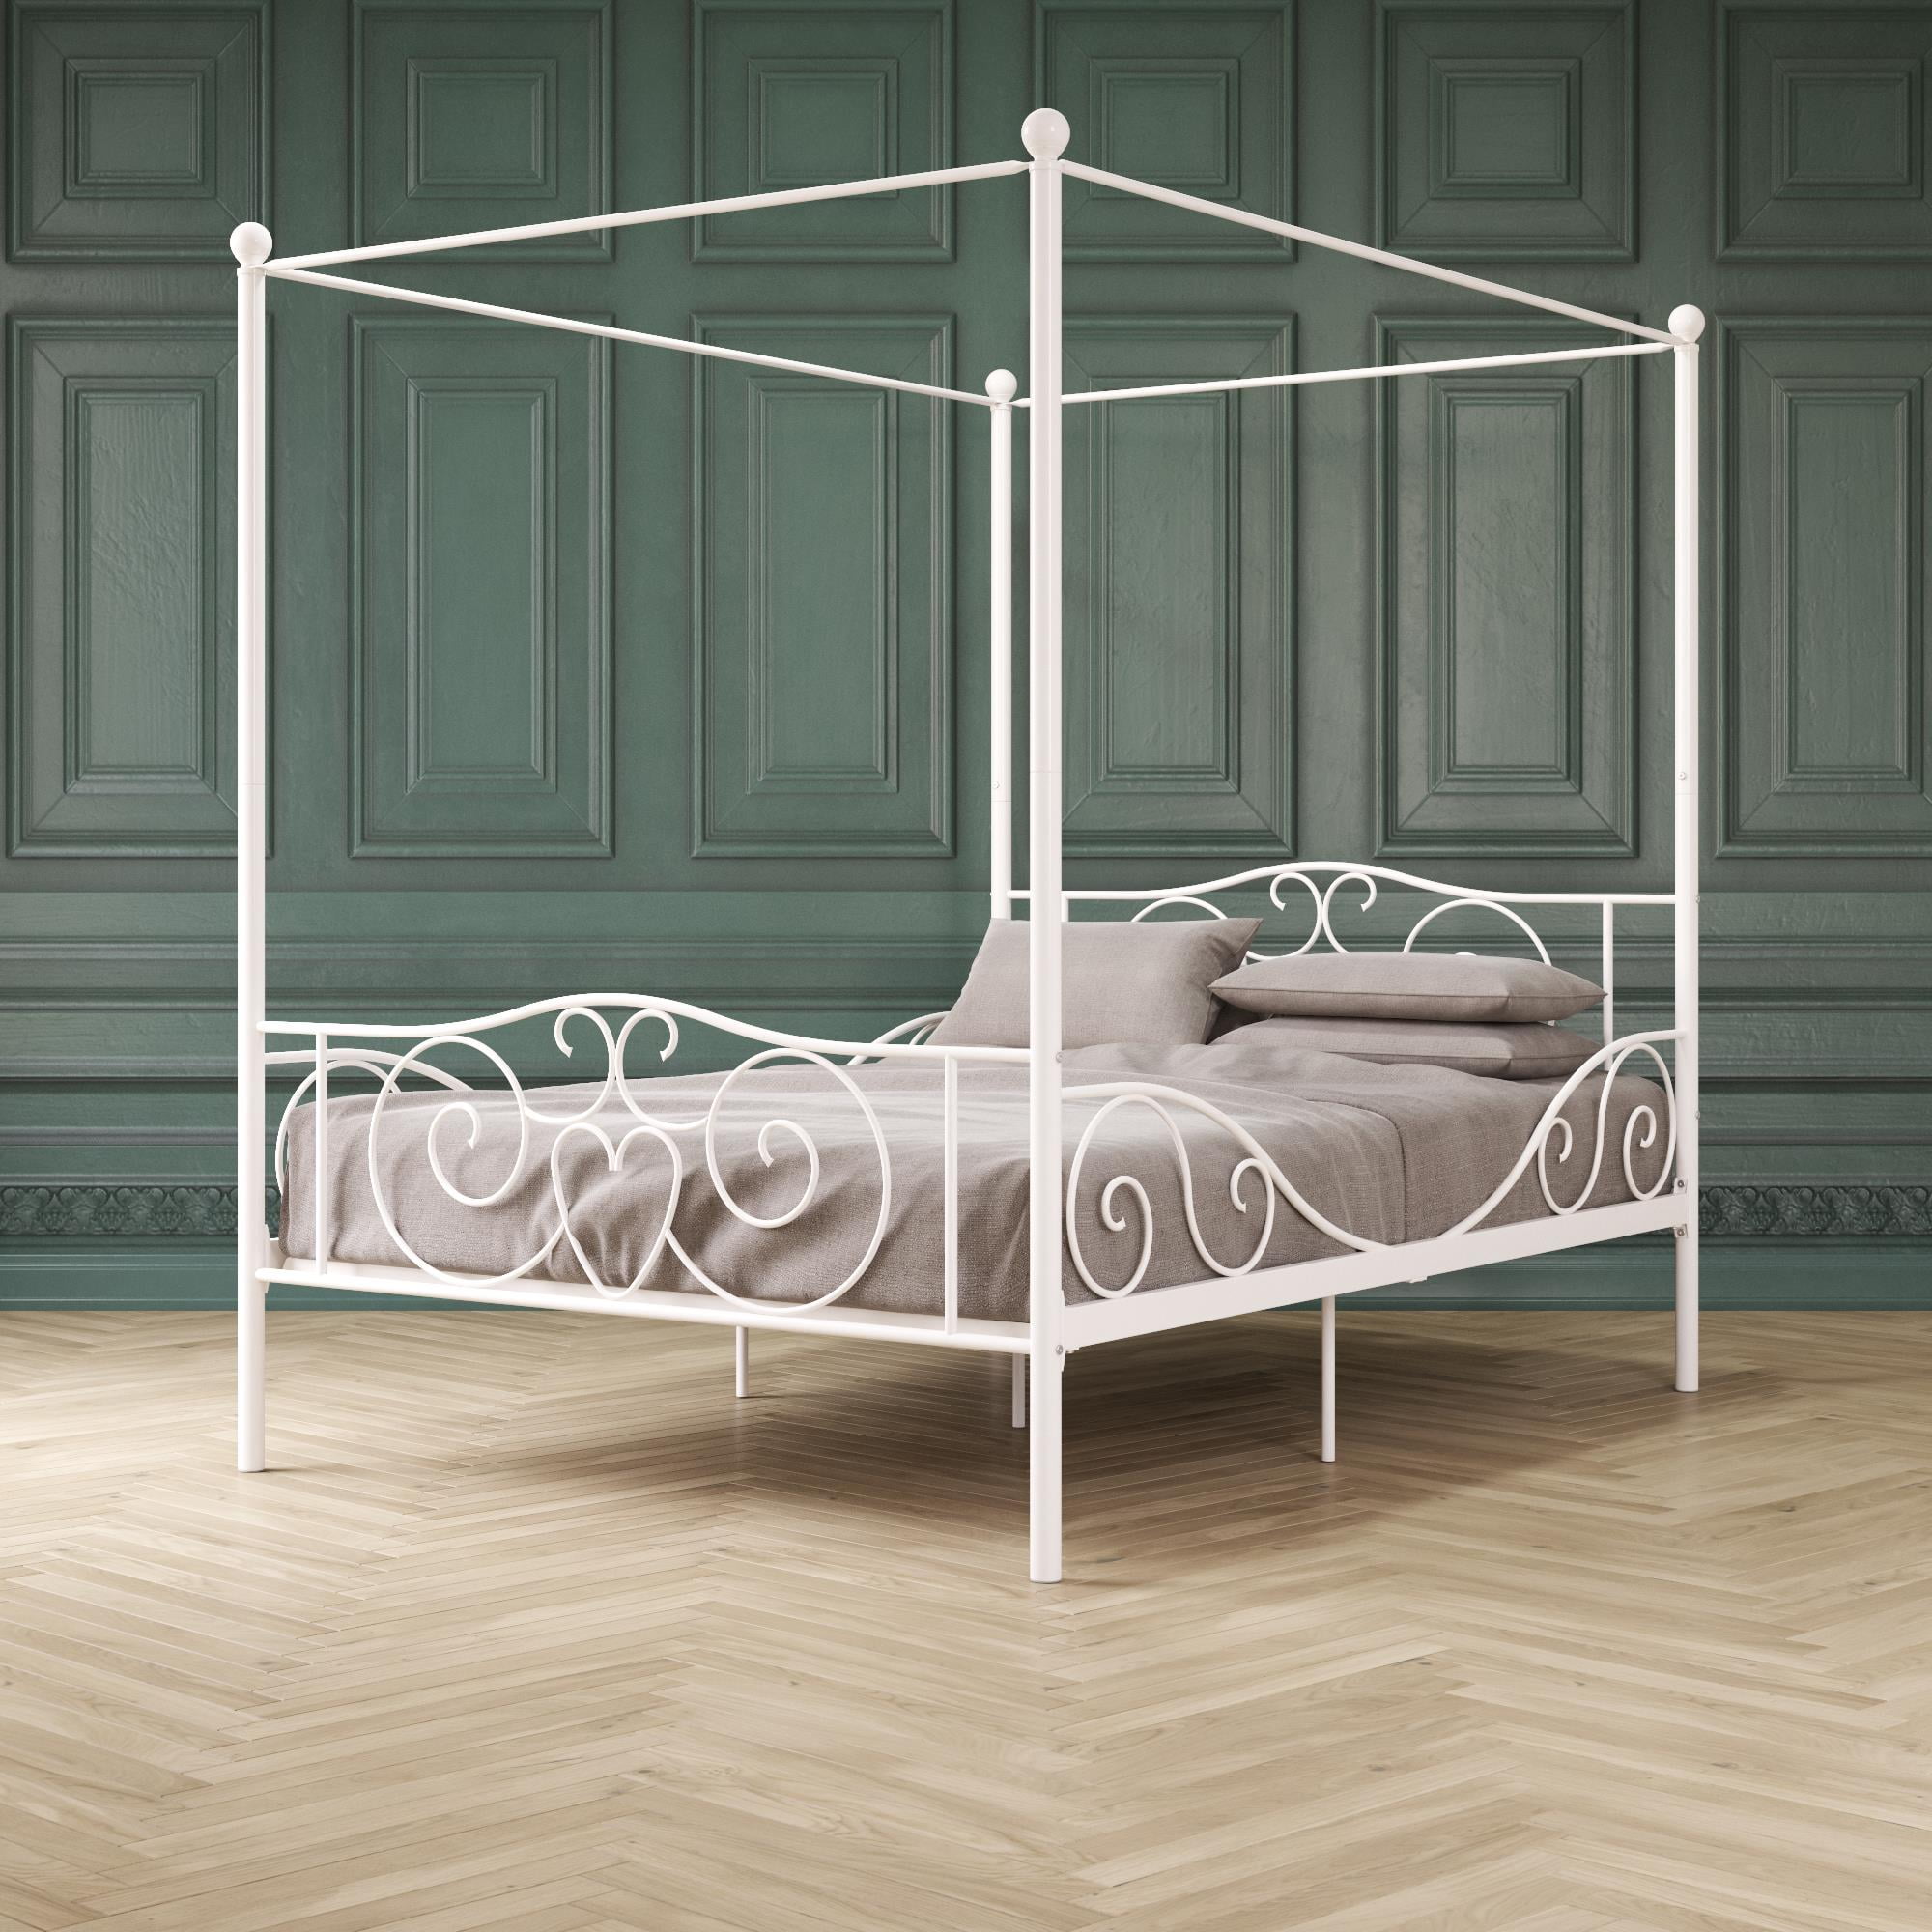 Oak Canopy Metal Bed Full Size Frame, Emerson White Metal Canopy Full Size Frame Bed